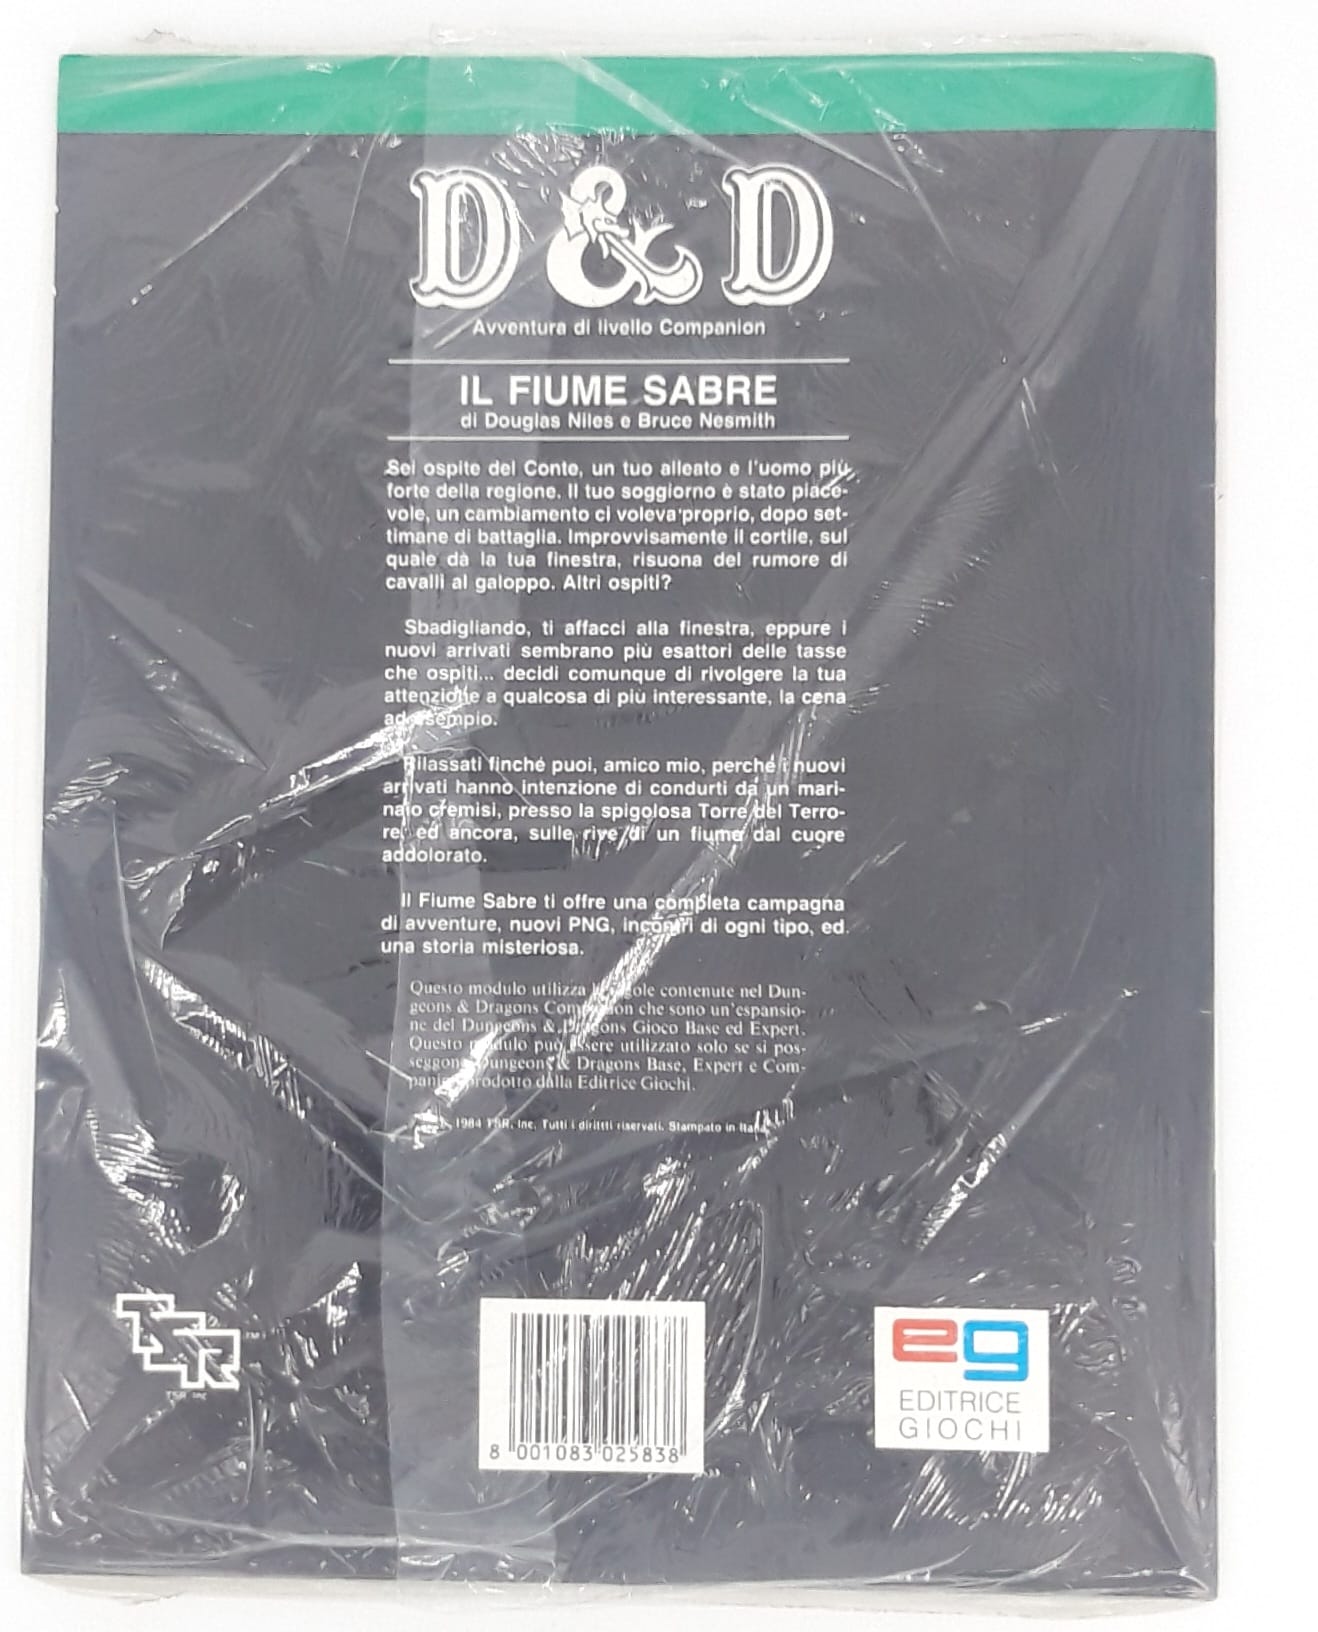 Dungeons and Dragons Il fiume Sabre